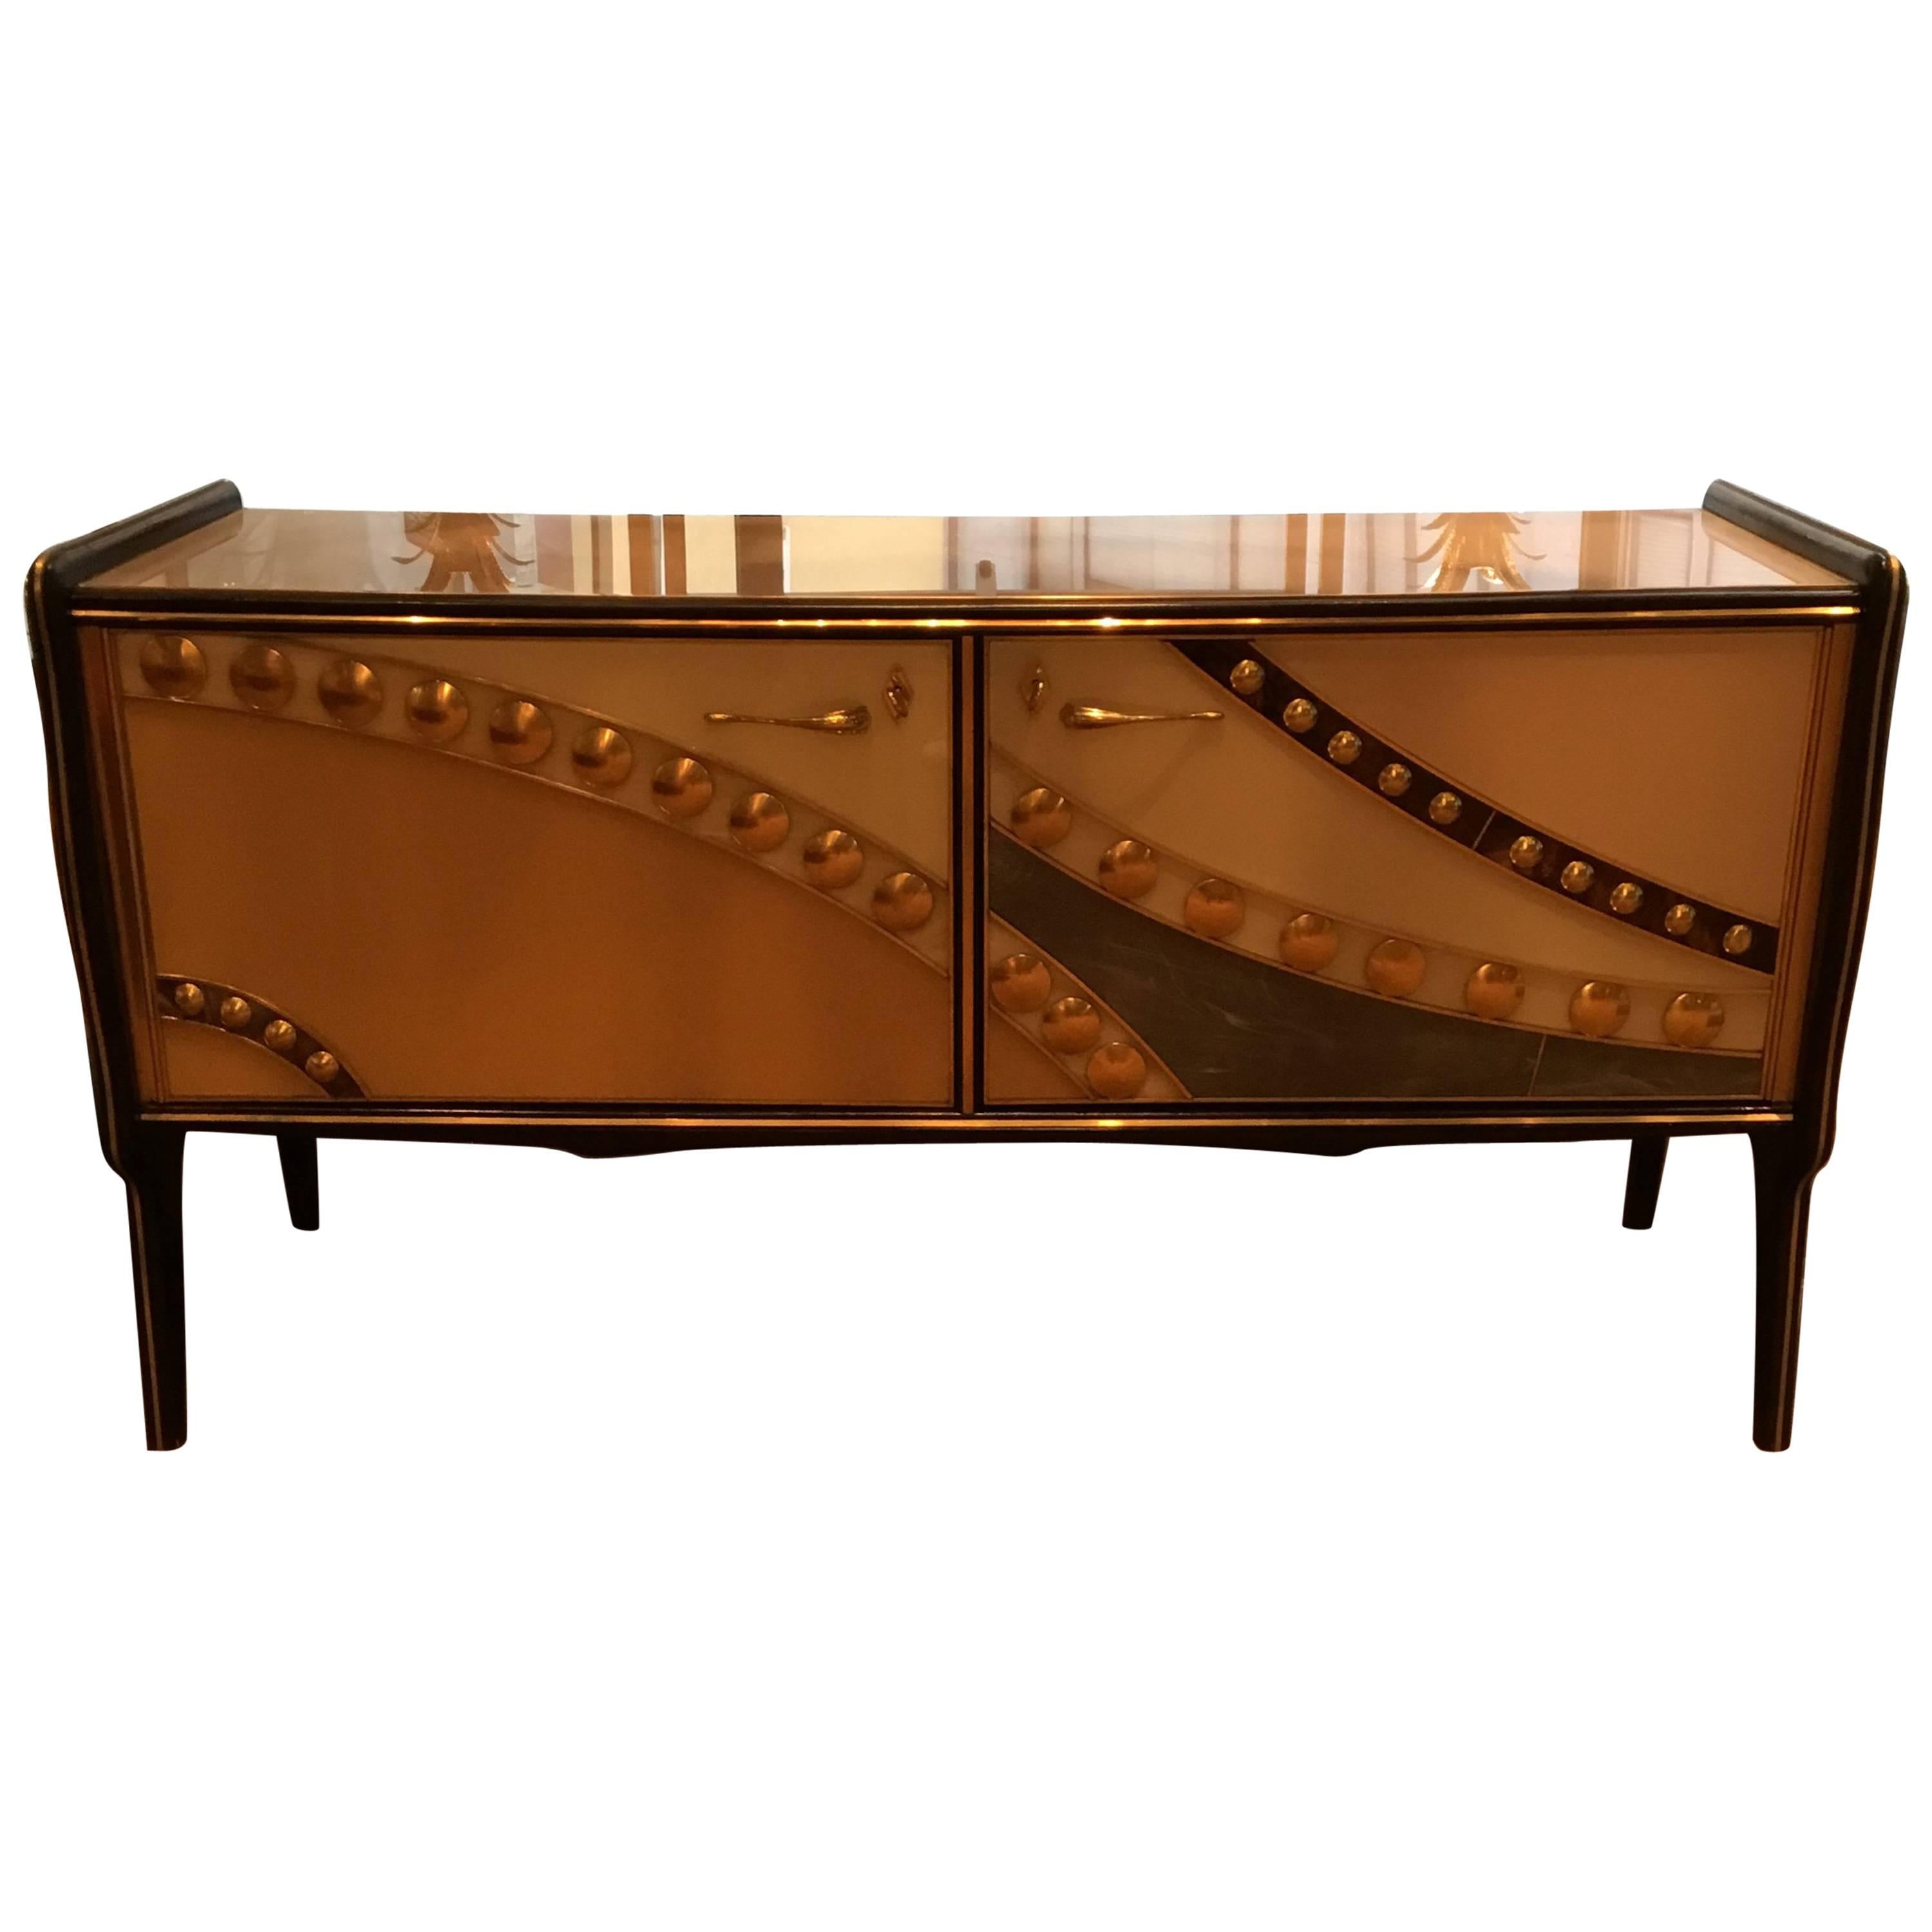 Vintage Italian Sideboard, made in Italy, glass and brass, 1990